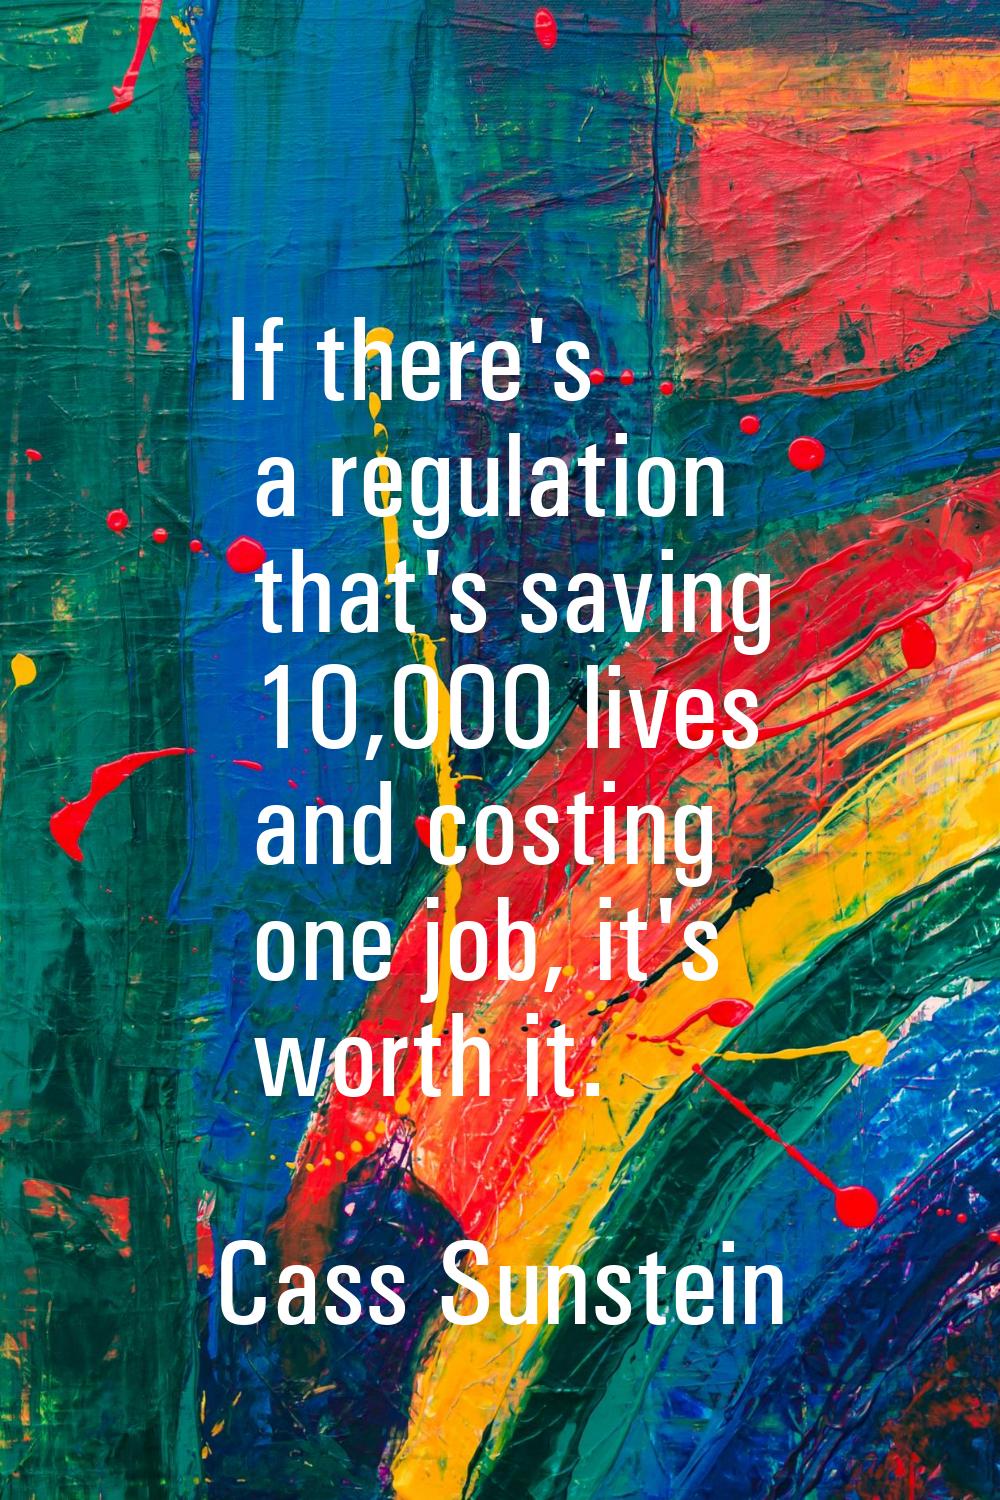 If there's a regulation that's saving 10,000 lives and costing one job, it's worth it.